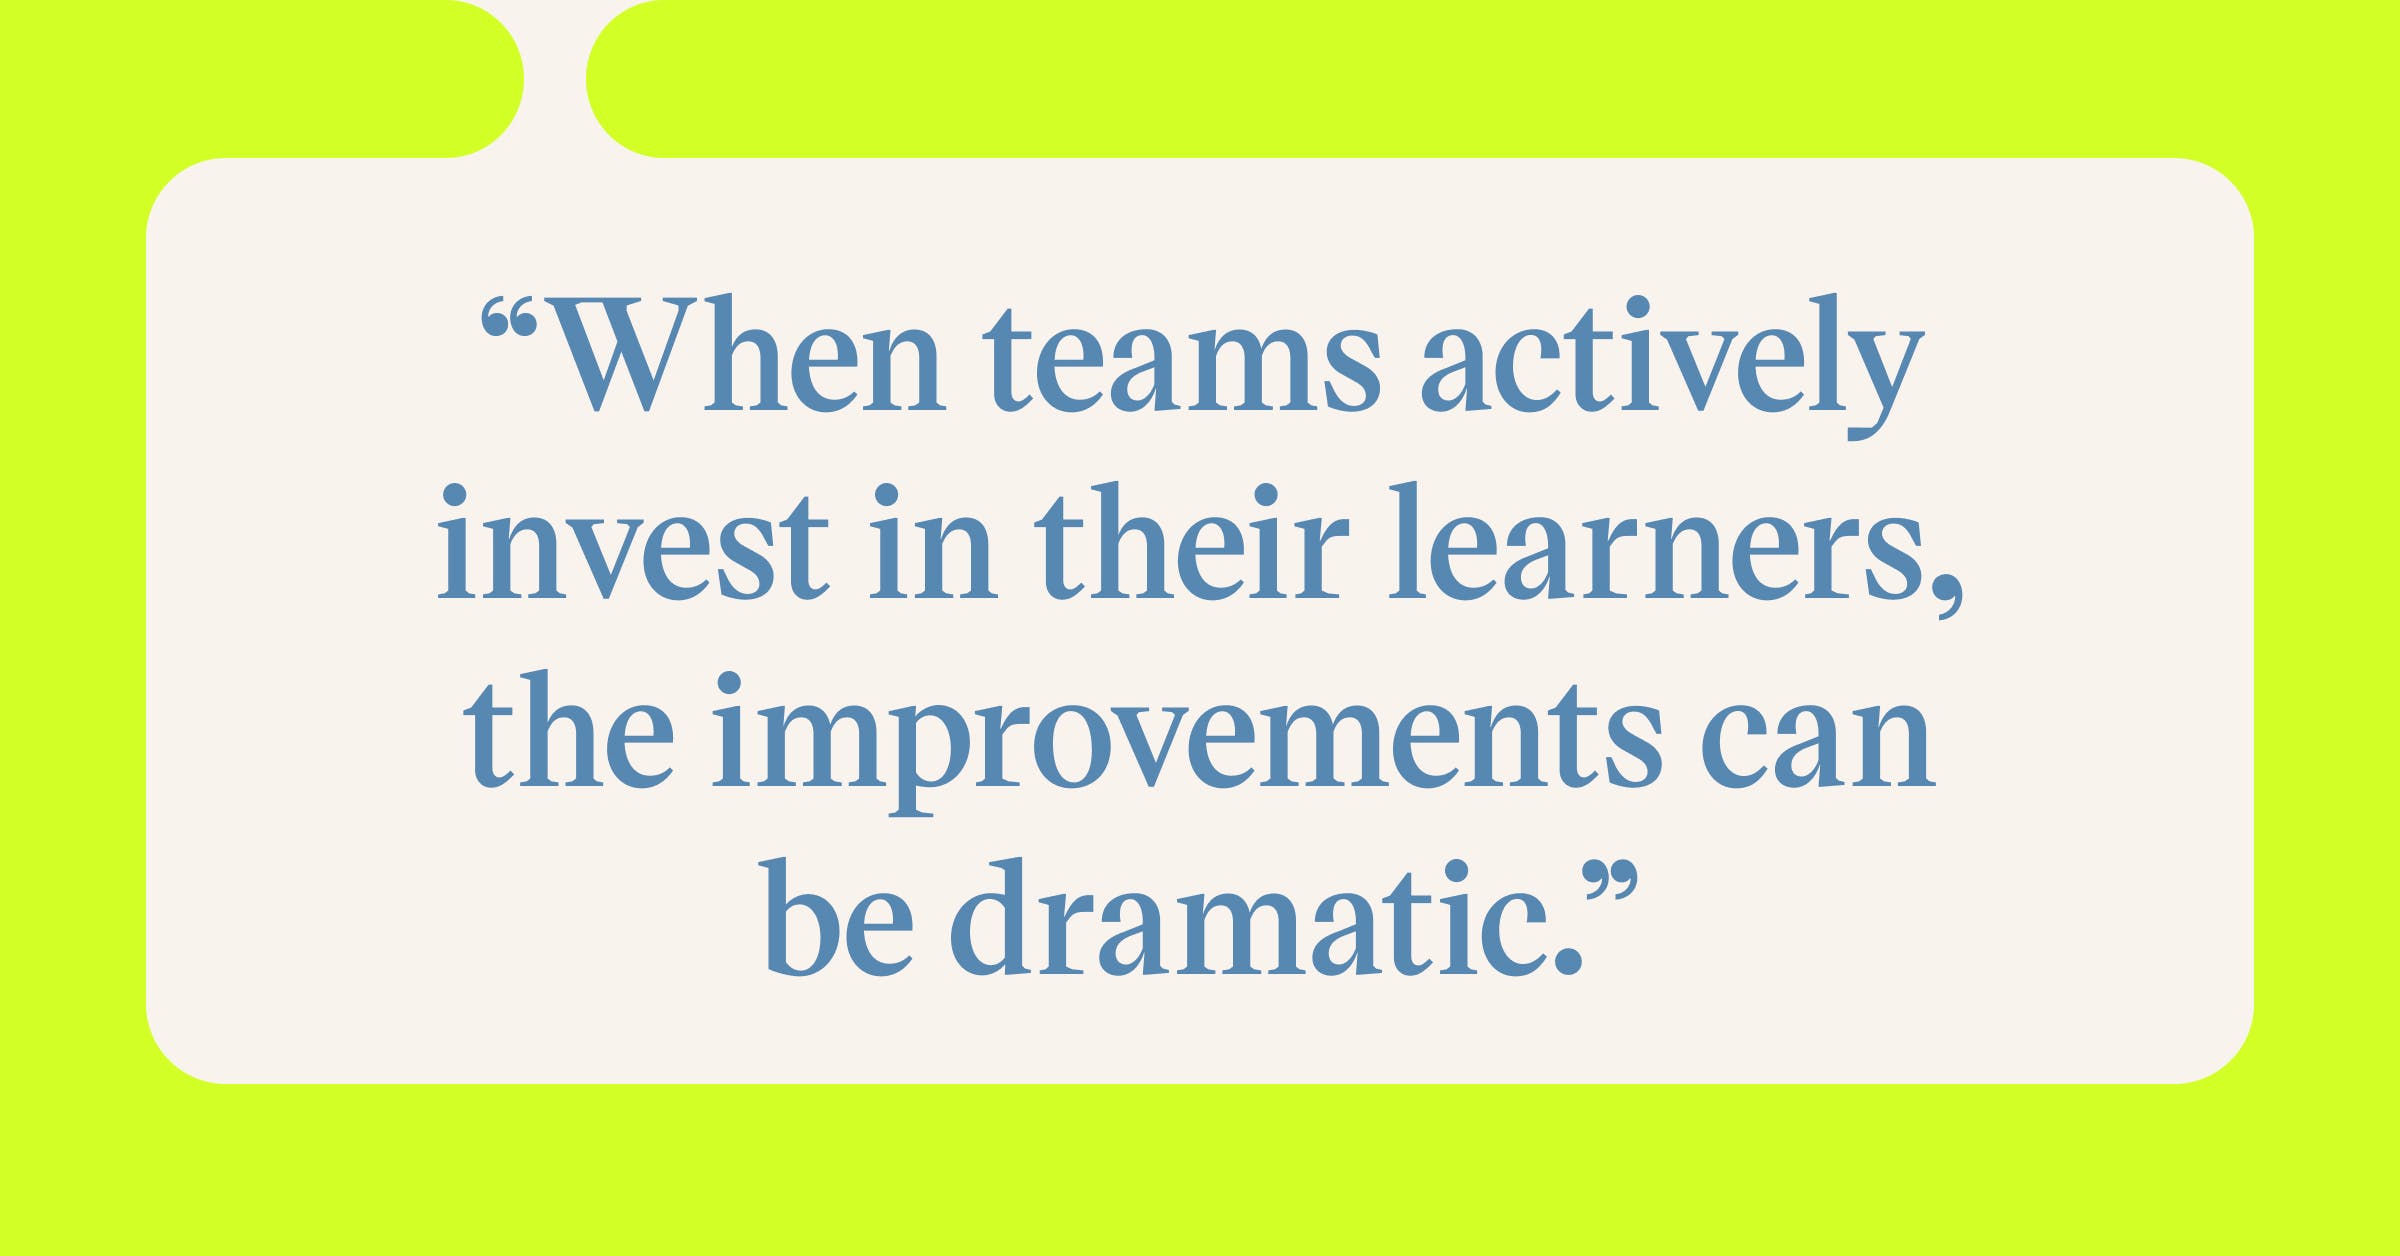 Pull quote with the text: When teams actively invest in their learners, the improvements can be dramatic